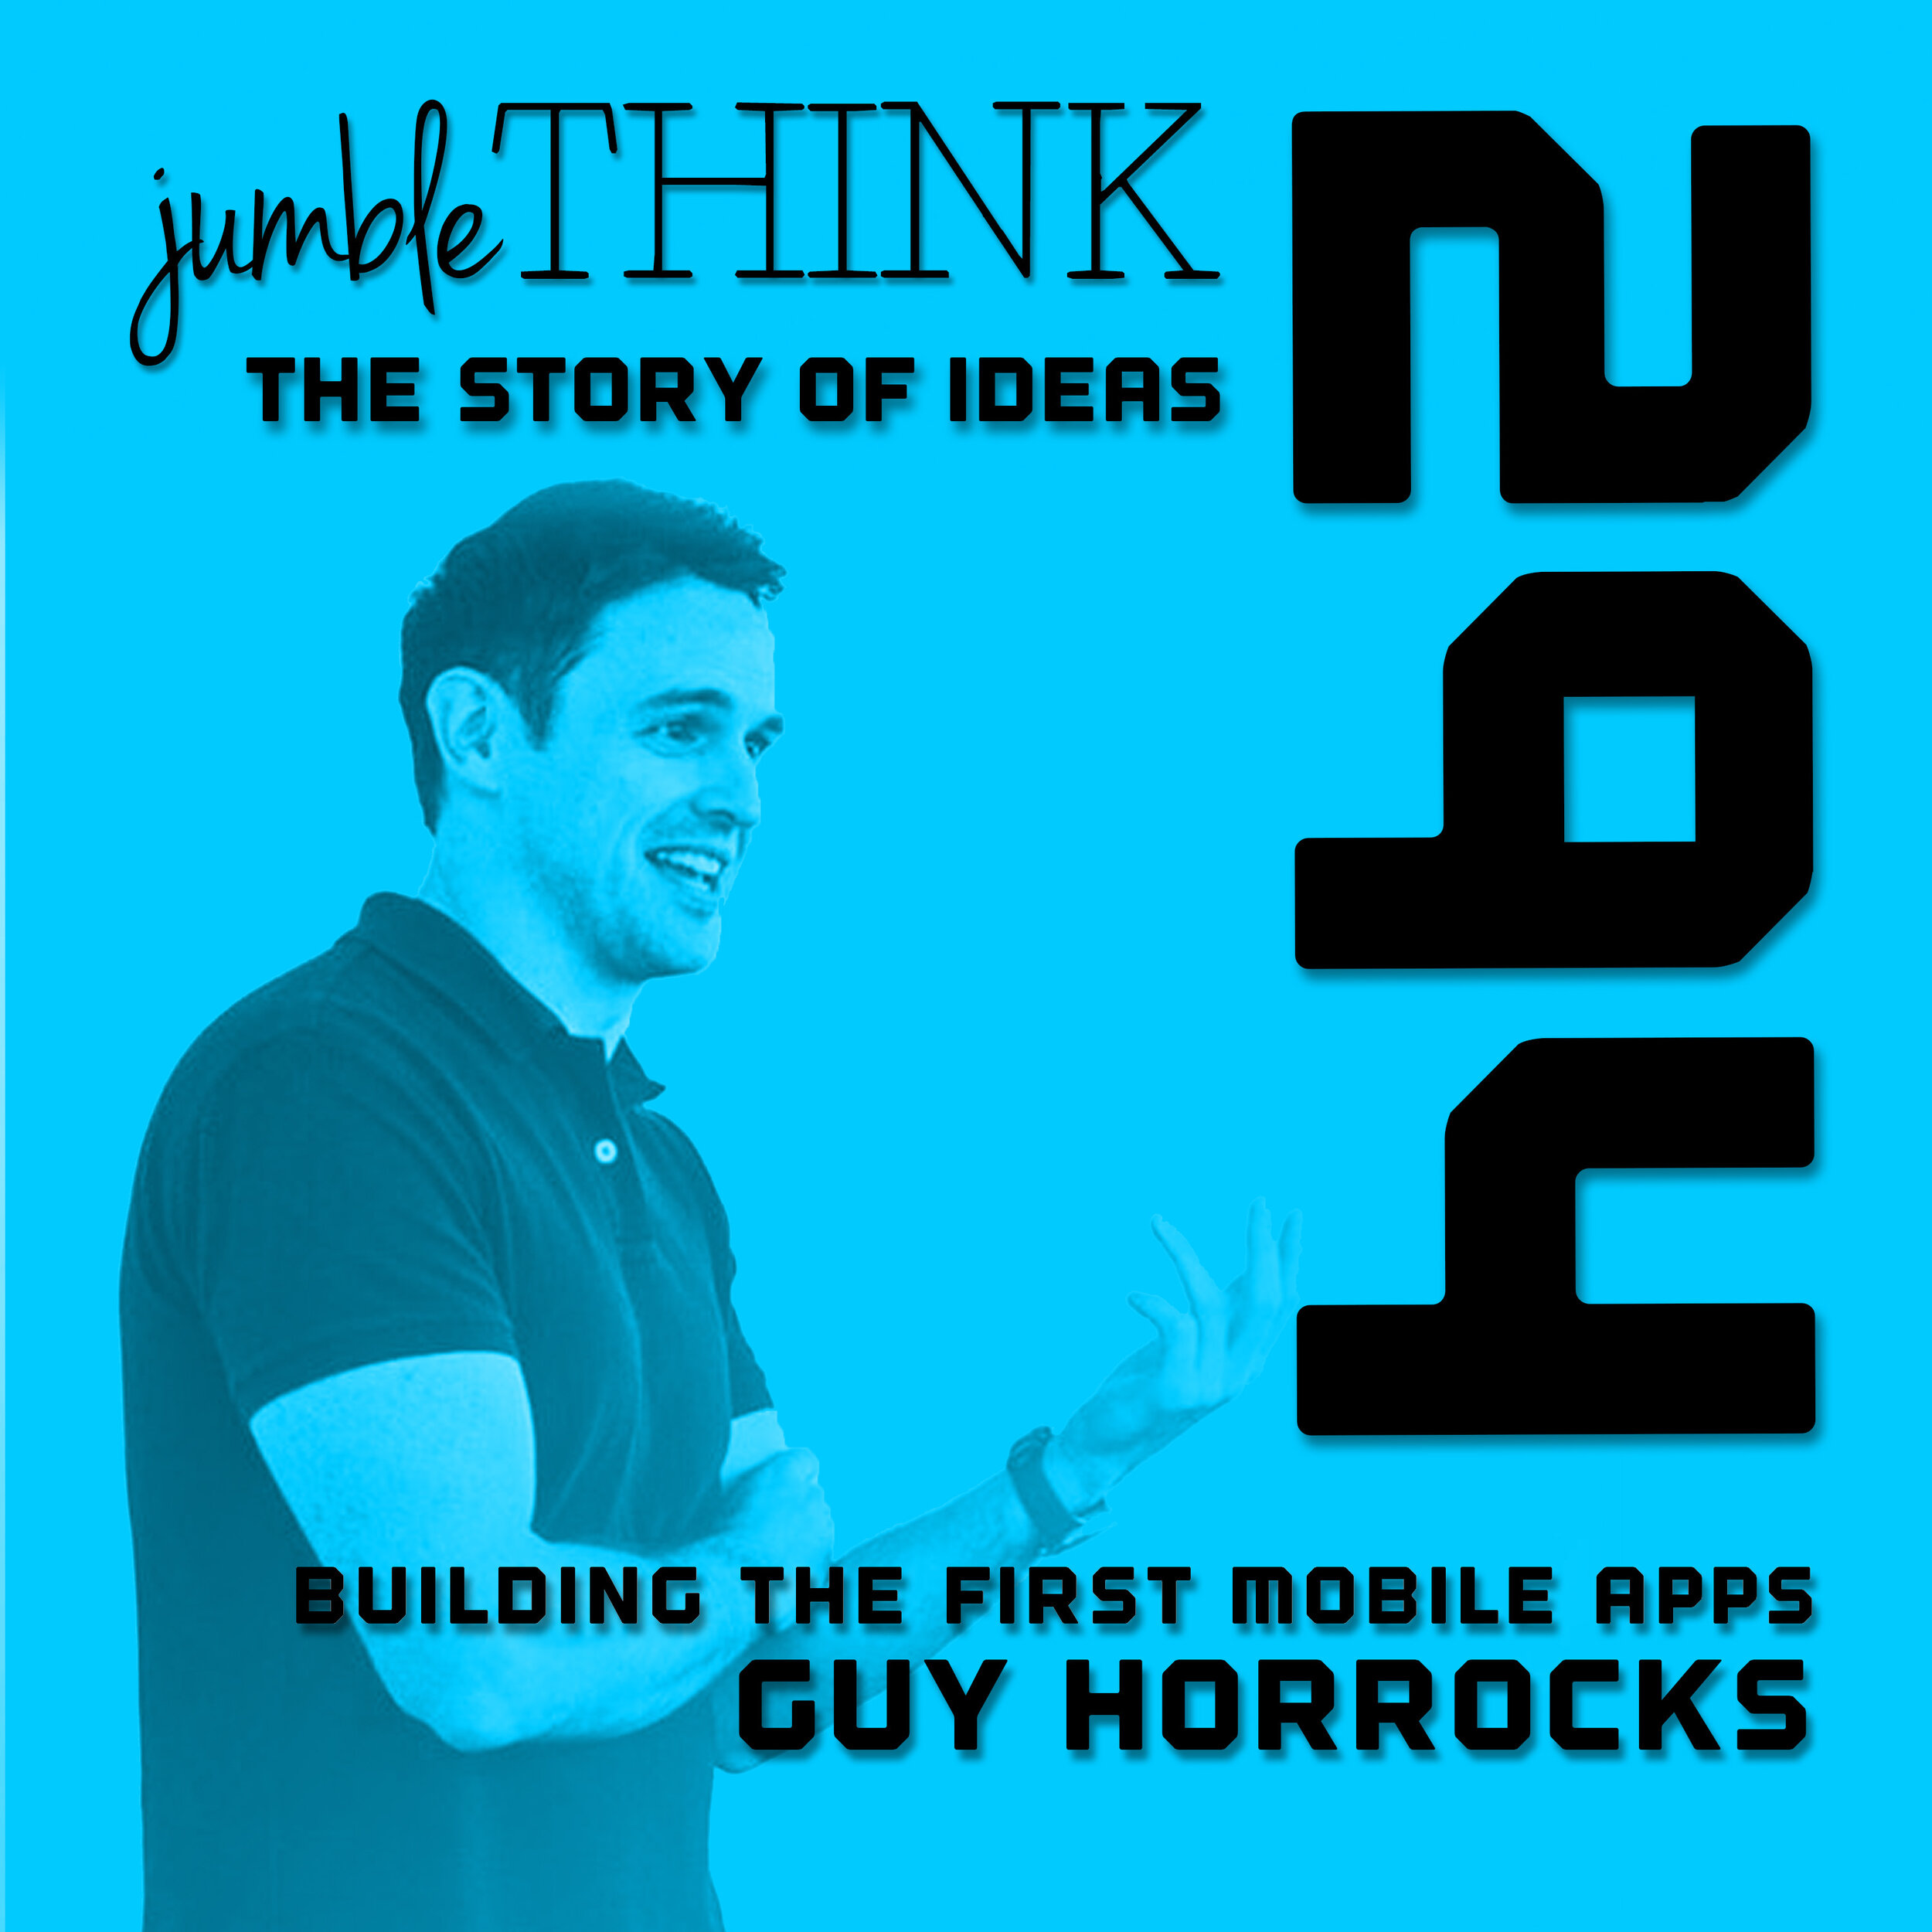 Building the First Mobile Apps